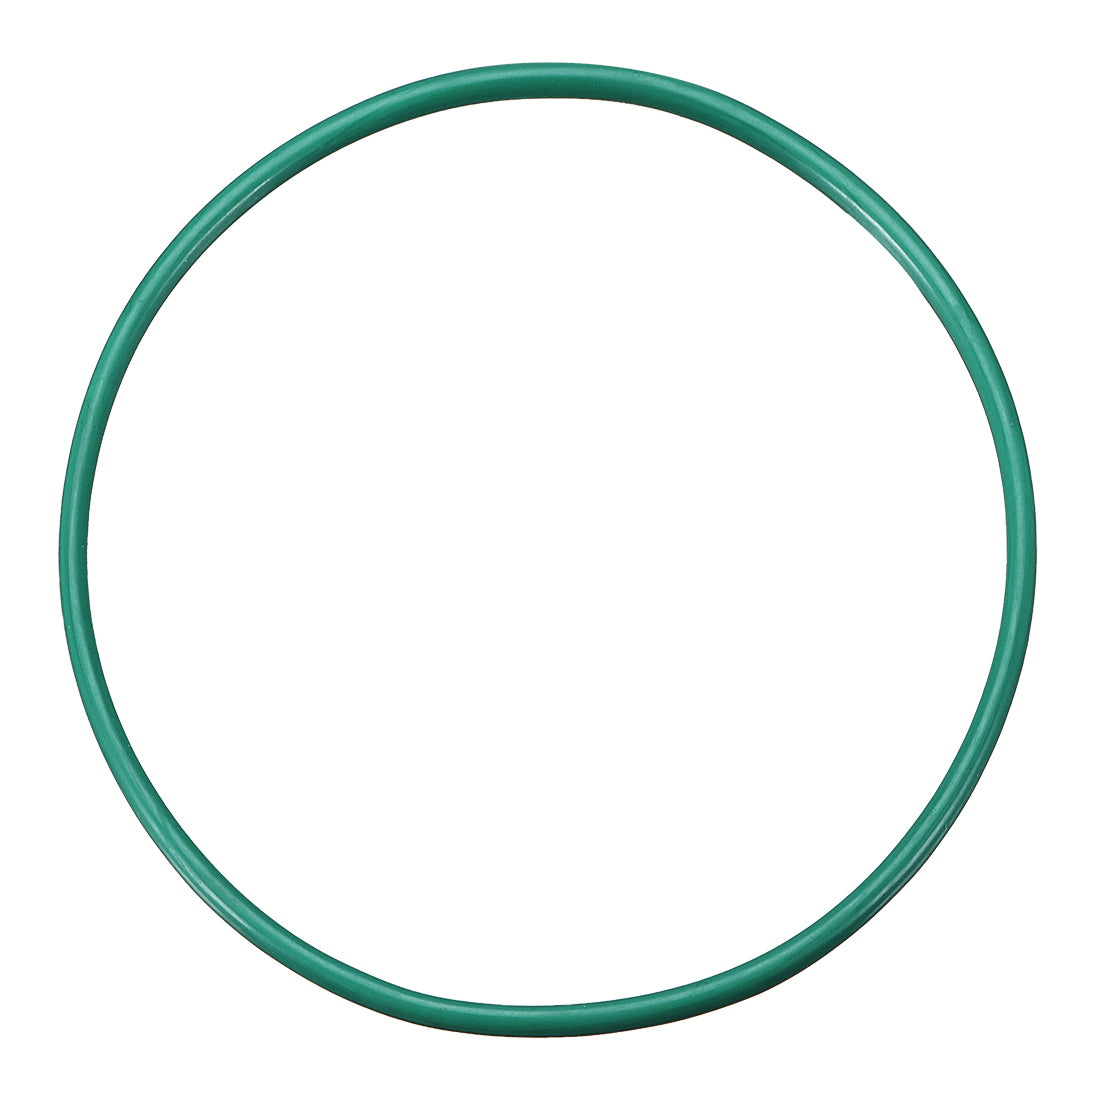 uxcell Uxcell O-Rings Fluorine Rubber 80mm x 85.3mm x 2.65mm Seal Rings Sealing Gasket